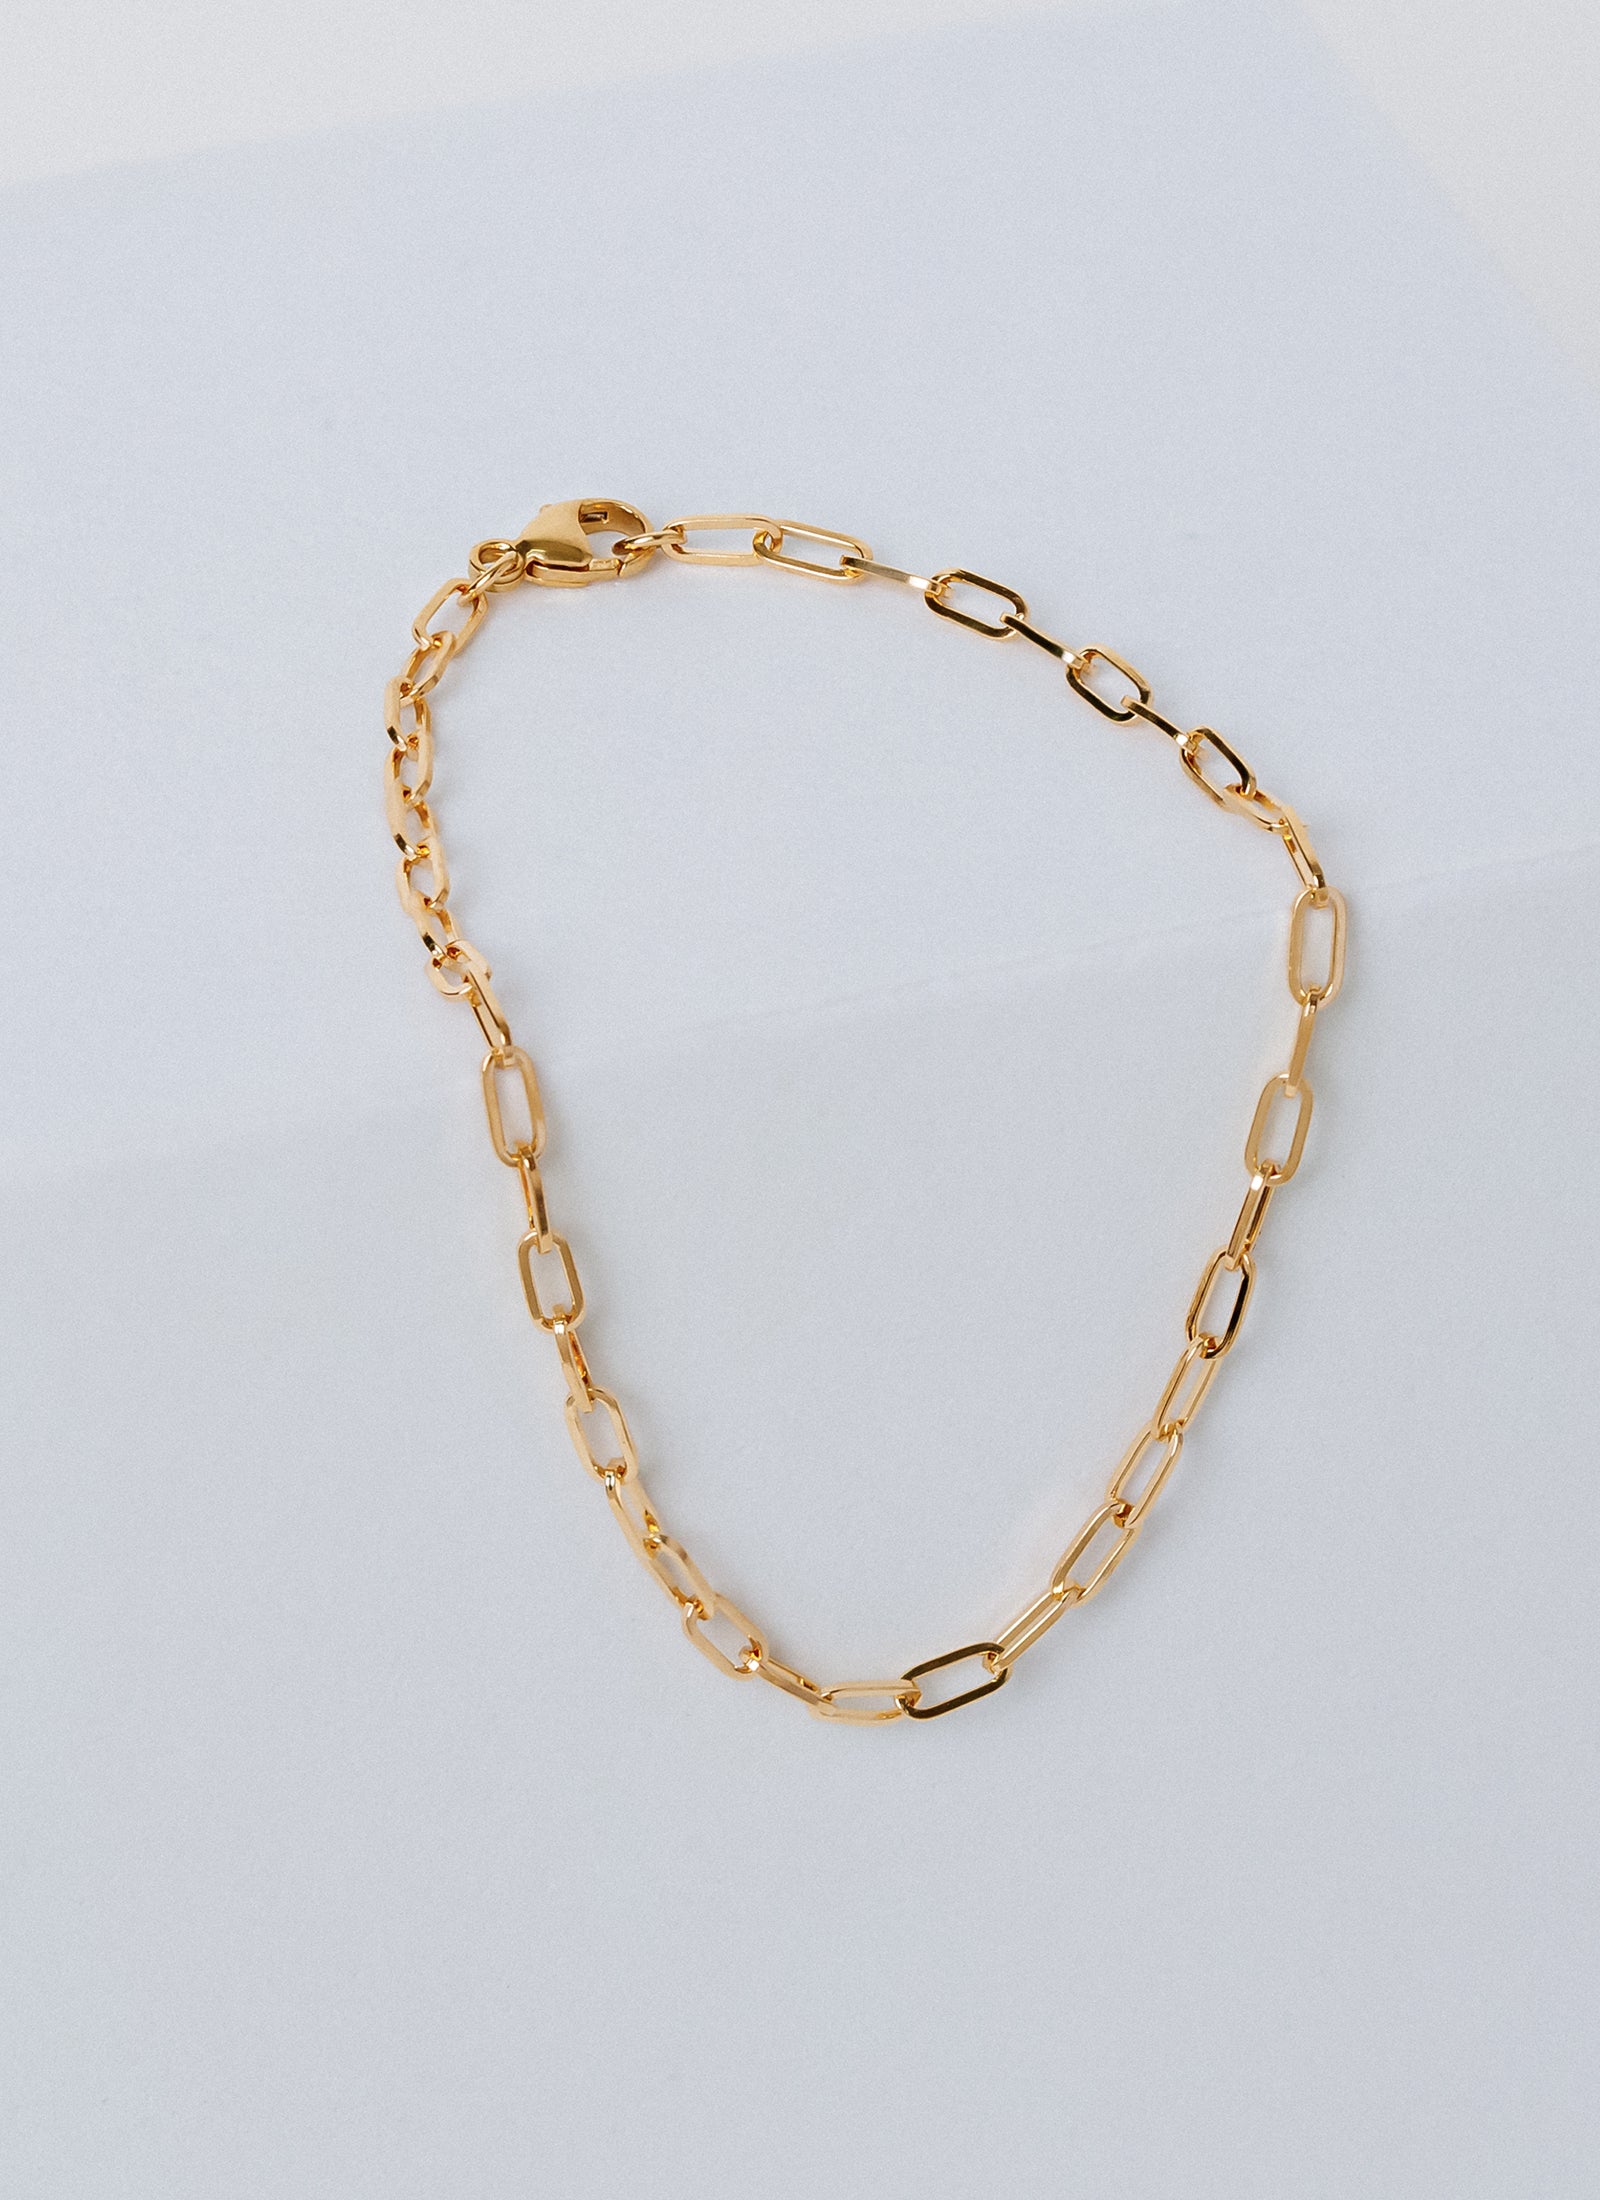 Gramercy Curb Chain Bracelet with Marquise Clasp from RIVA New York